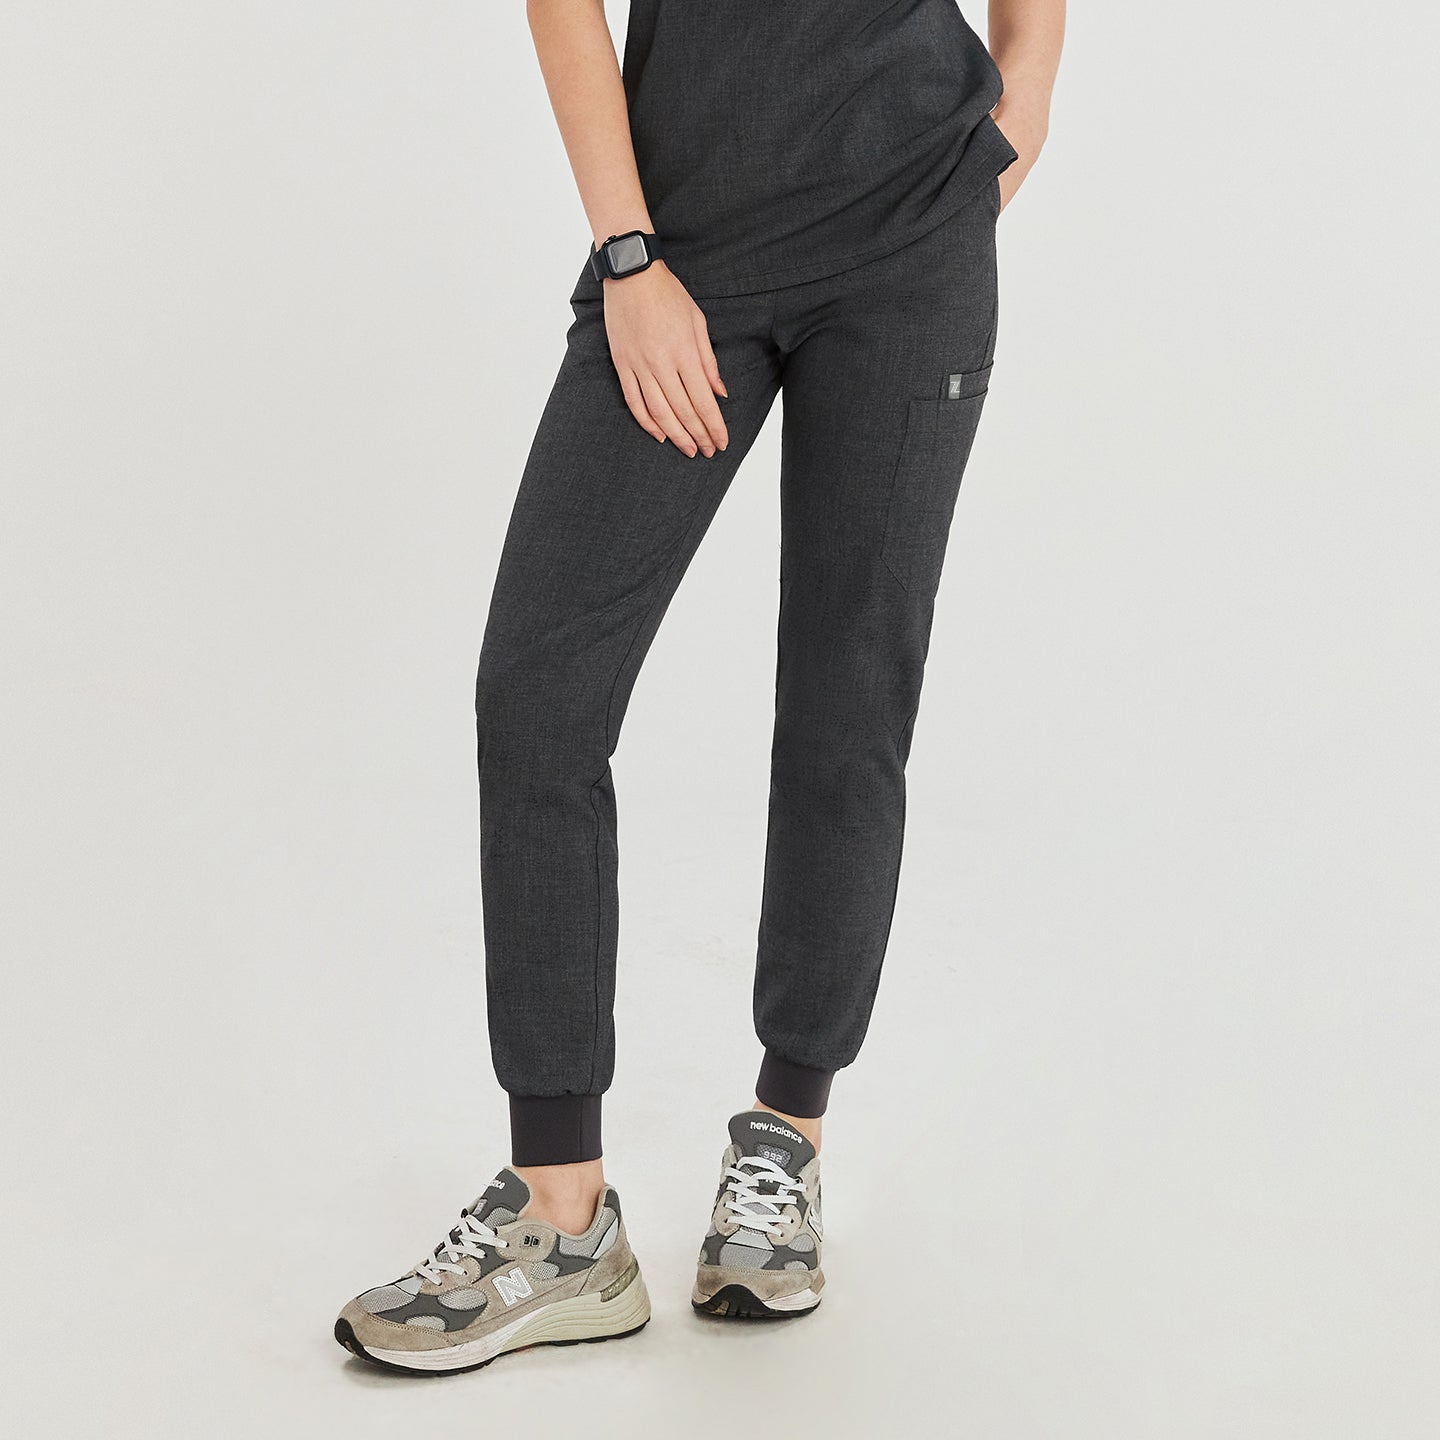 Charcoal gray jogger scrub pants with a drawstring waist, side pockets, and a close-up front view showcasing the detailed fit and practical design,Charcoal Gray